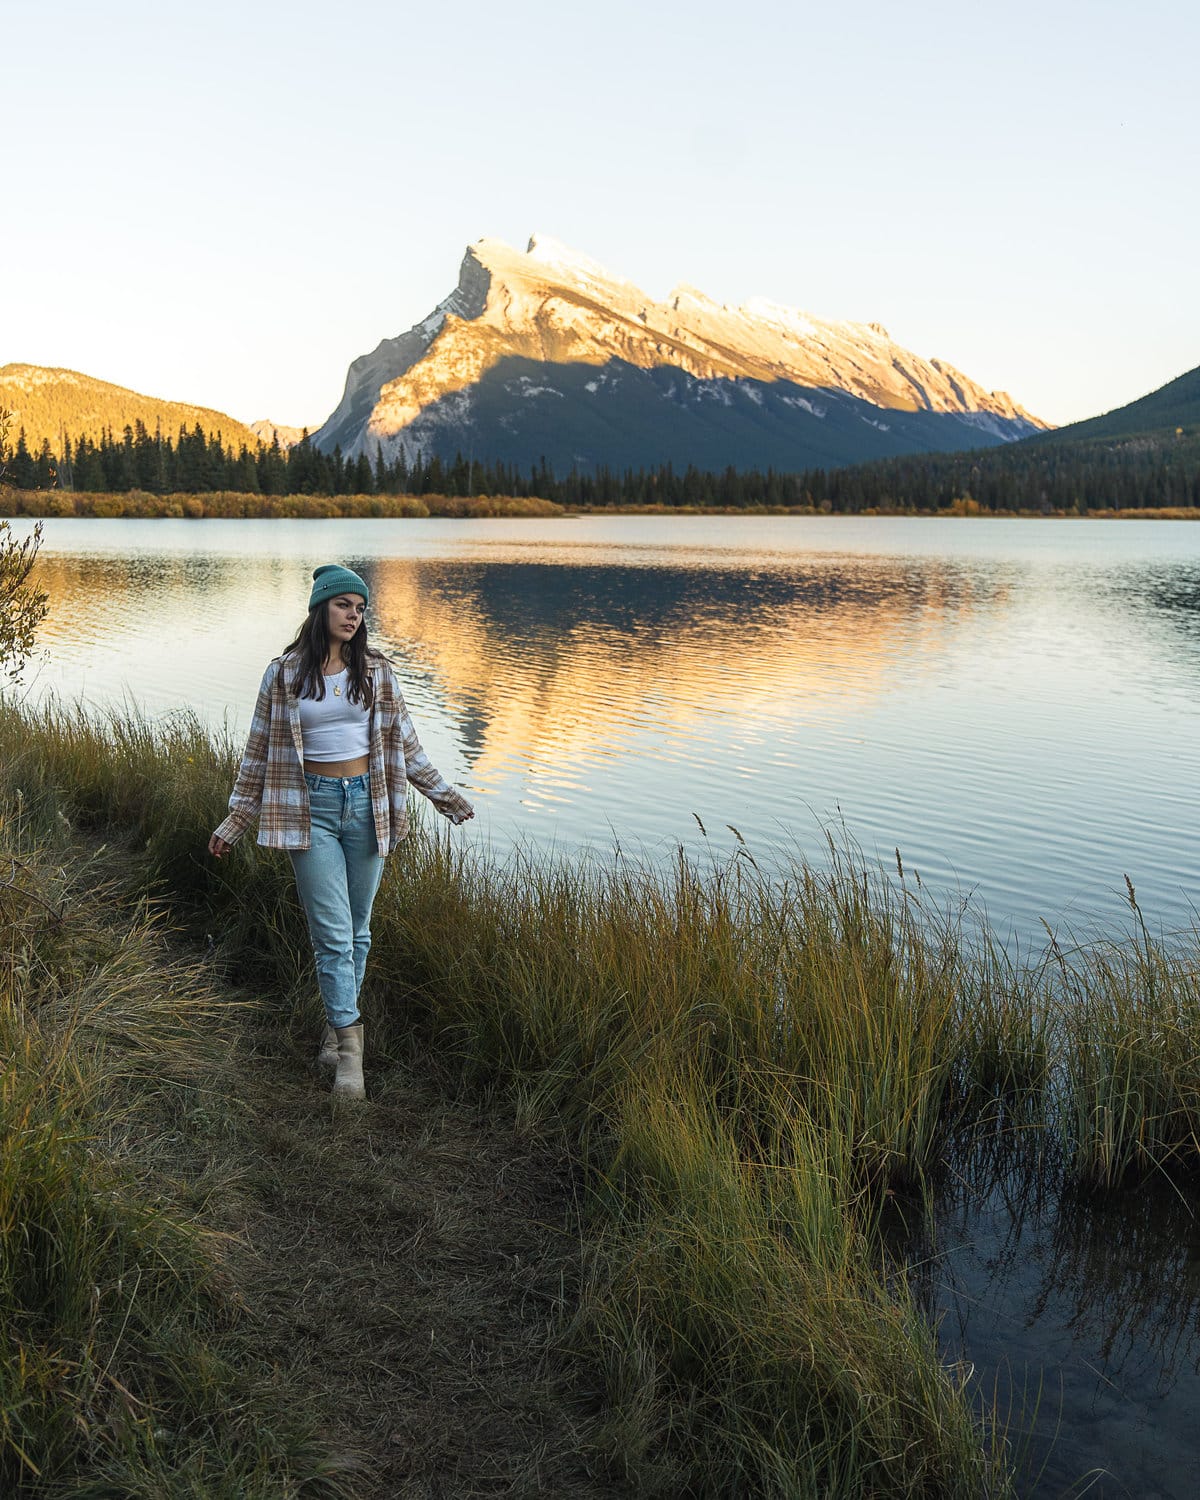 vermillion lakes is a beautiful mountain lake with a view of mount rundle, and epic mountain and one of the best things to do in banff national park